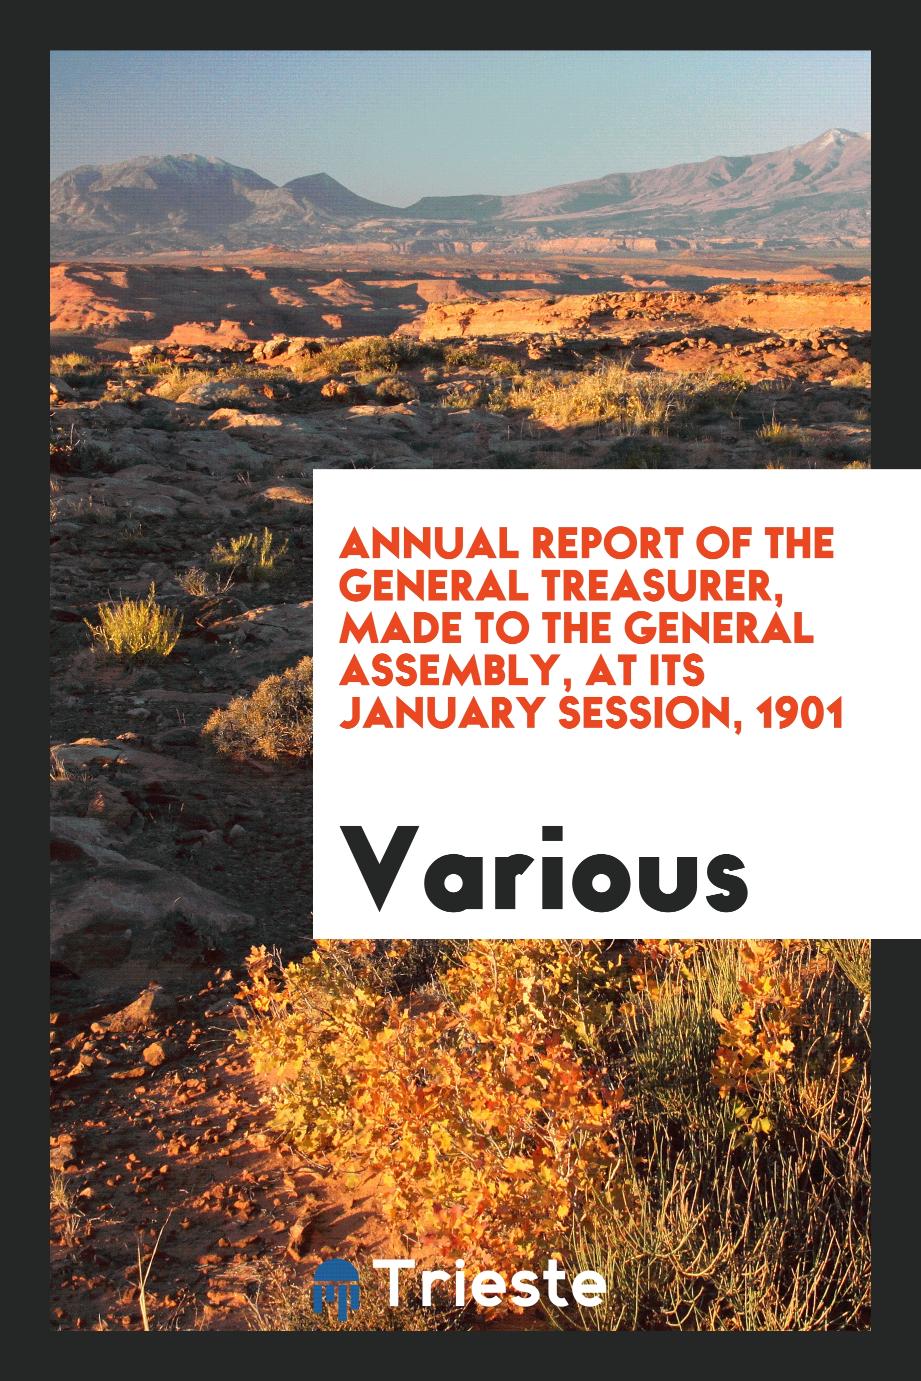 Annual Report of the General Treasurer, Made to the General Assembly, at its January Session, 1901